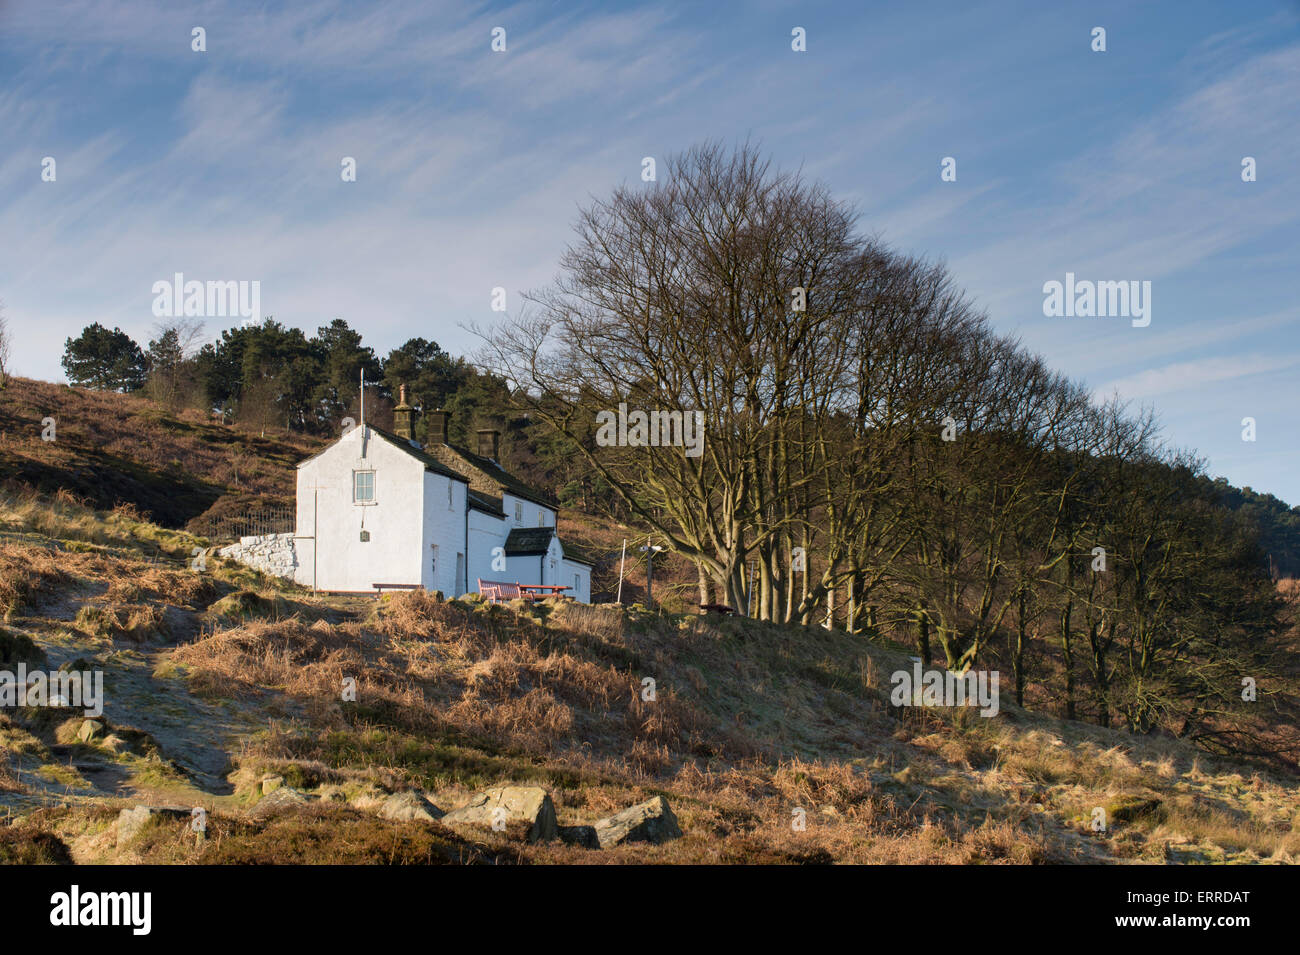 Sunlit under a blue sky, solitary & isolated, White Wells Spa Cottage, is perched high on a hillside slope - Ilkley Moor, West Yorkshire, England, UK. Stock Photo